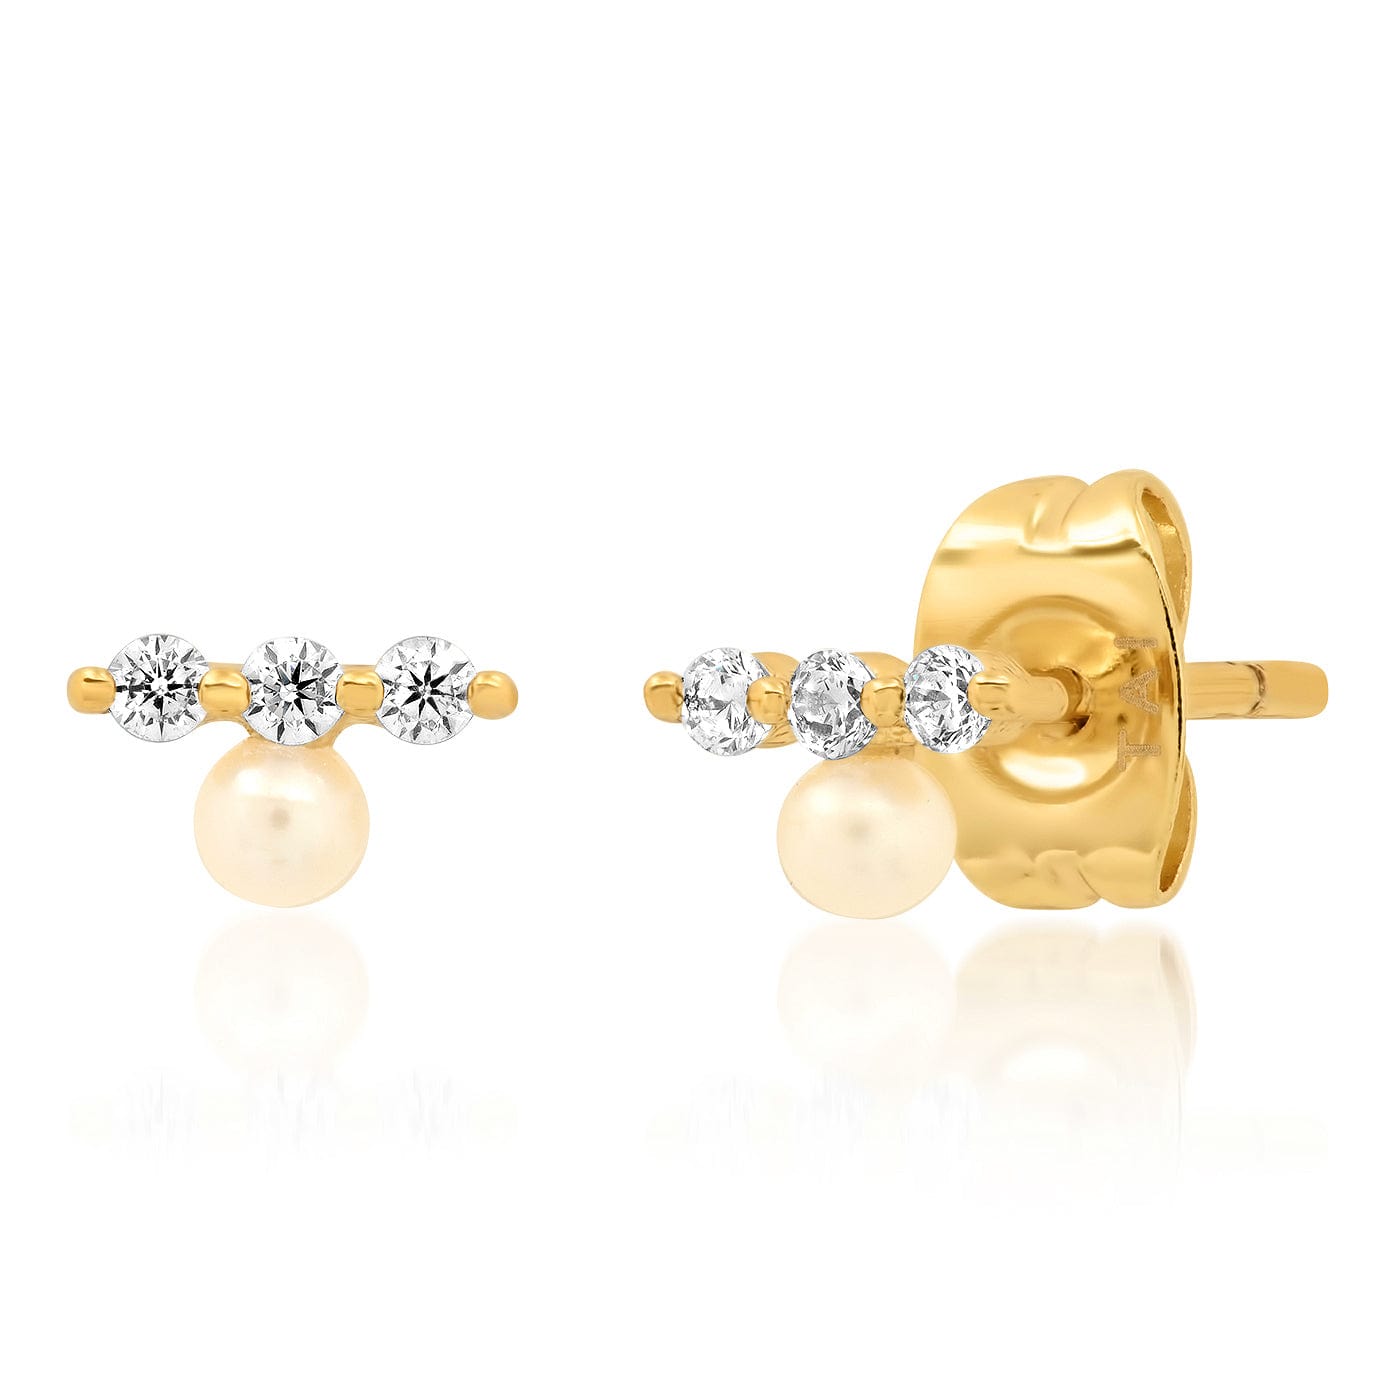 TAI JEWELRY Earrings CZ Bar Stud With Single Pearl Accent